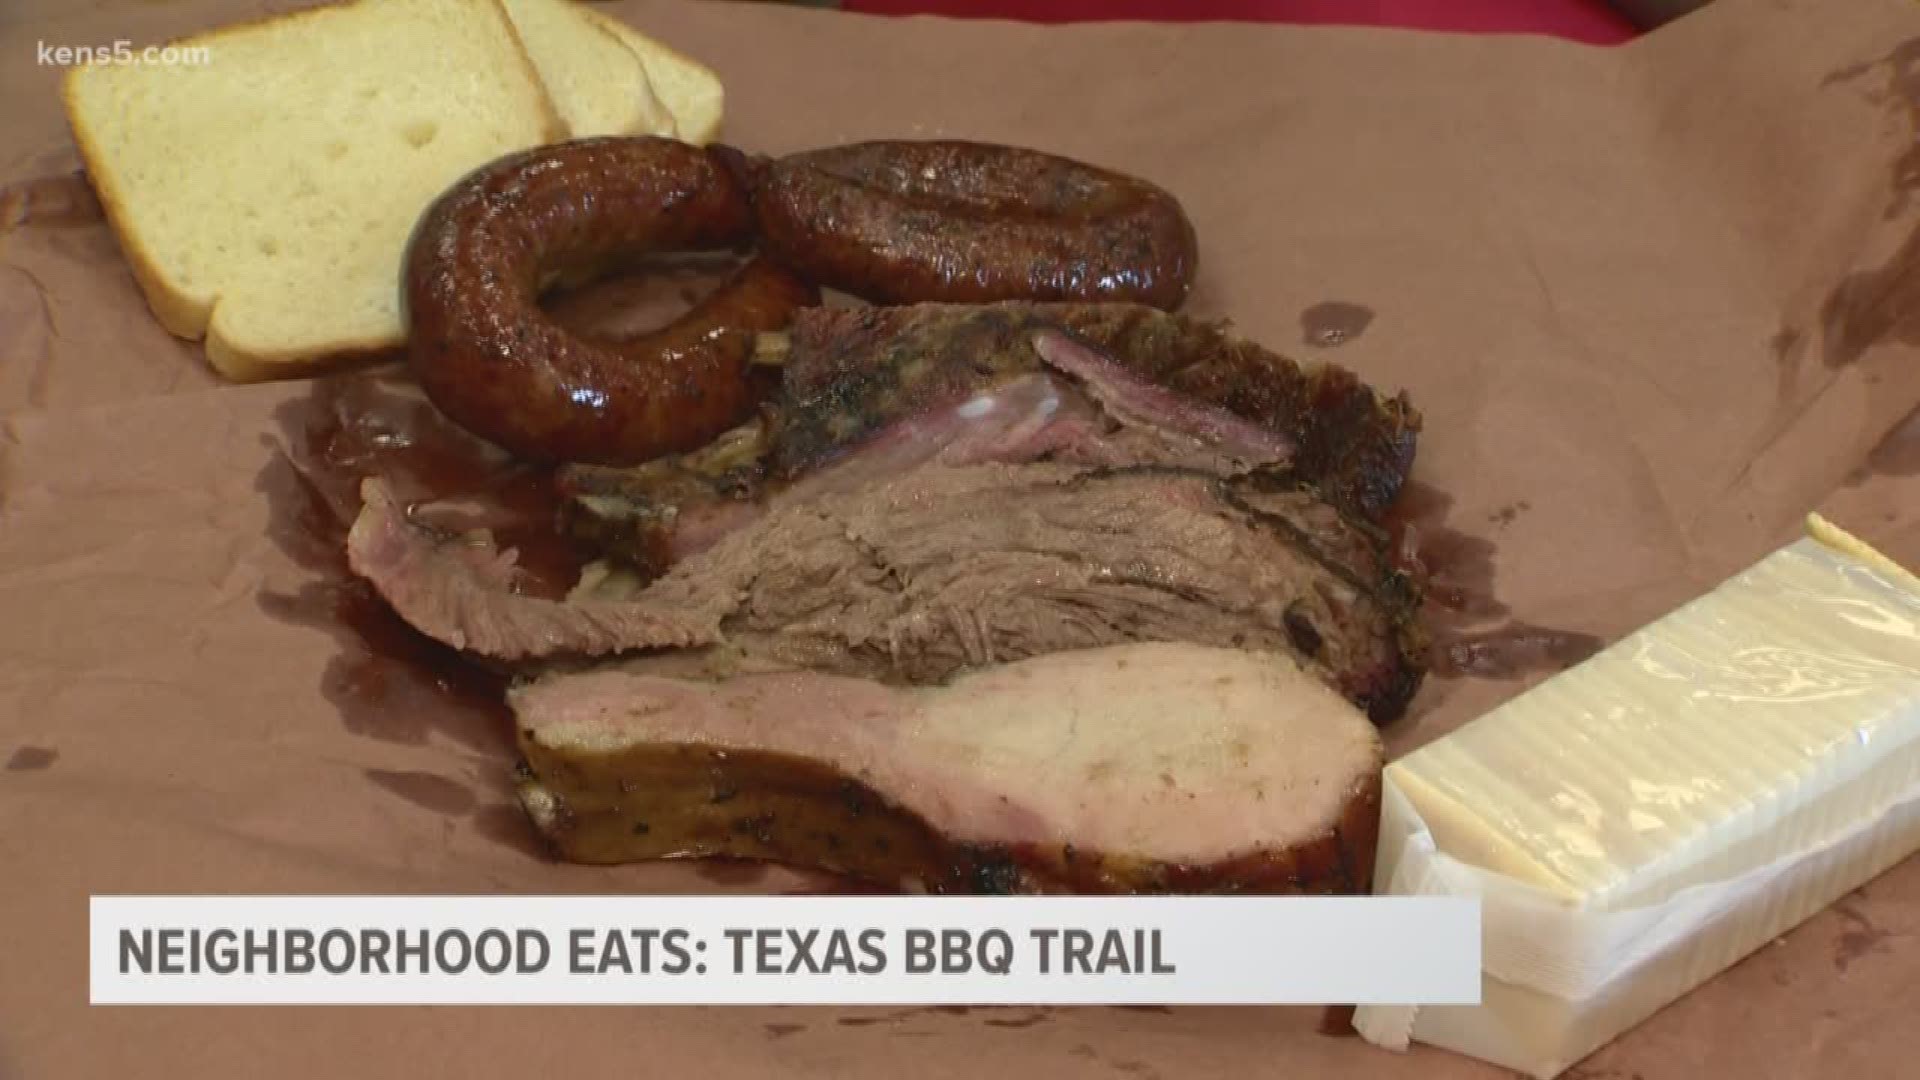 KENS 5's Marvin Hurst visits several barbecue places around Texas as part of his "Texas BBQ Trail" tour.